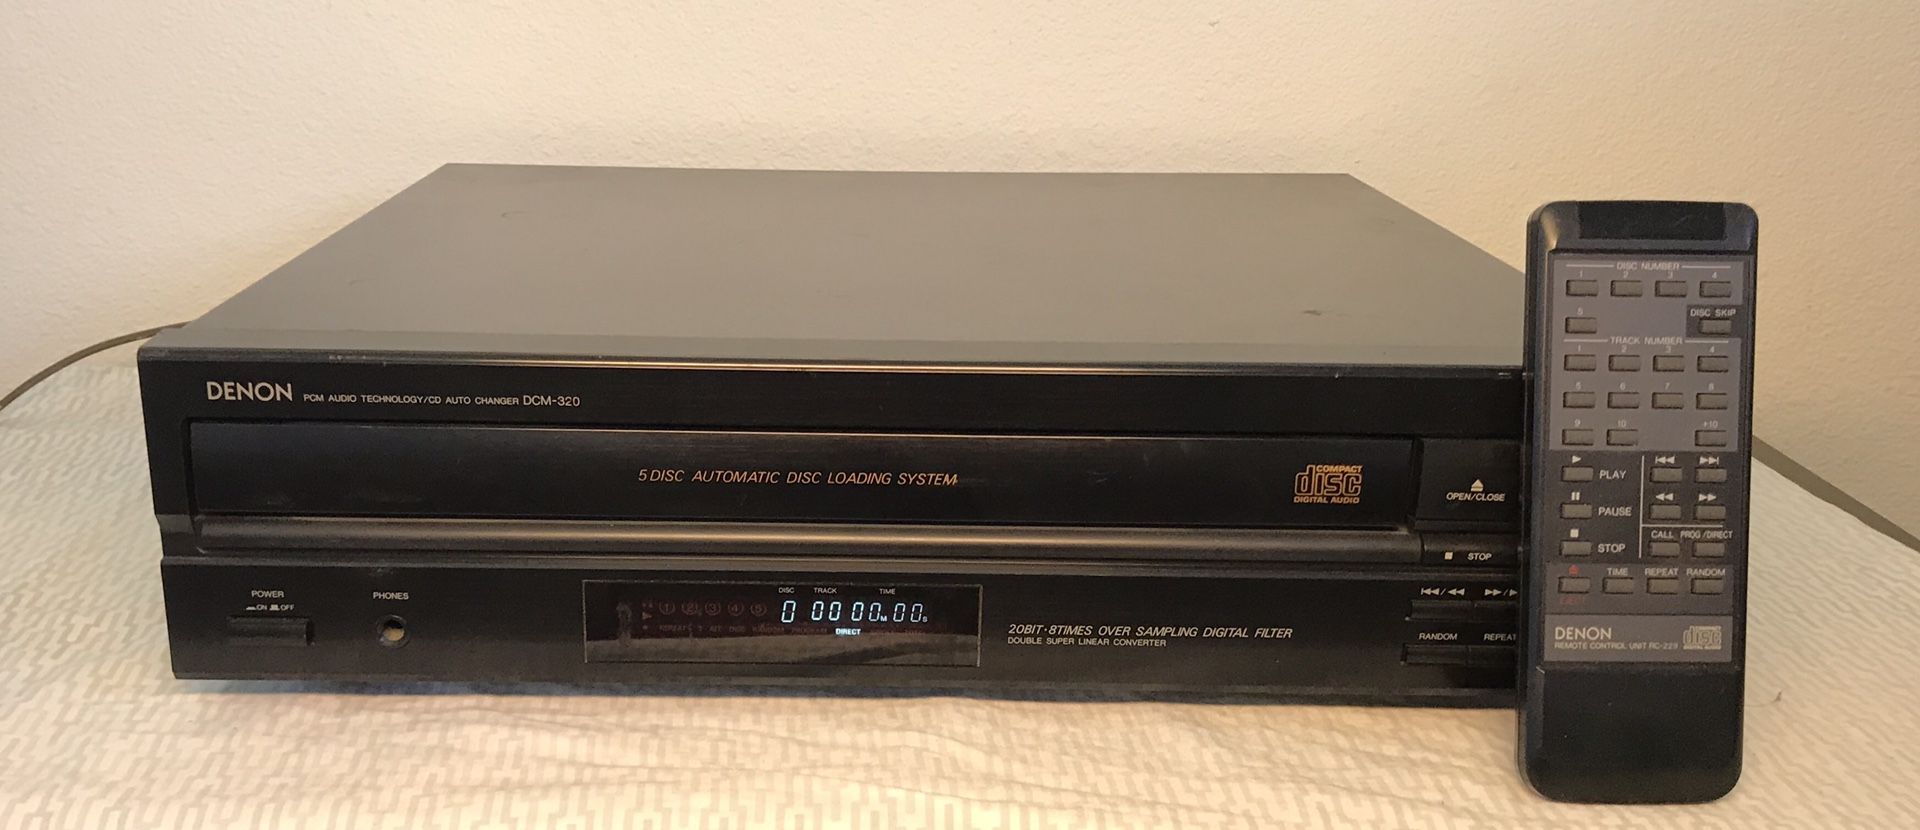 Denon DCM-320 Audiophile CD Player with 5 Disc Changer & Original remote. Good working